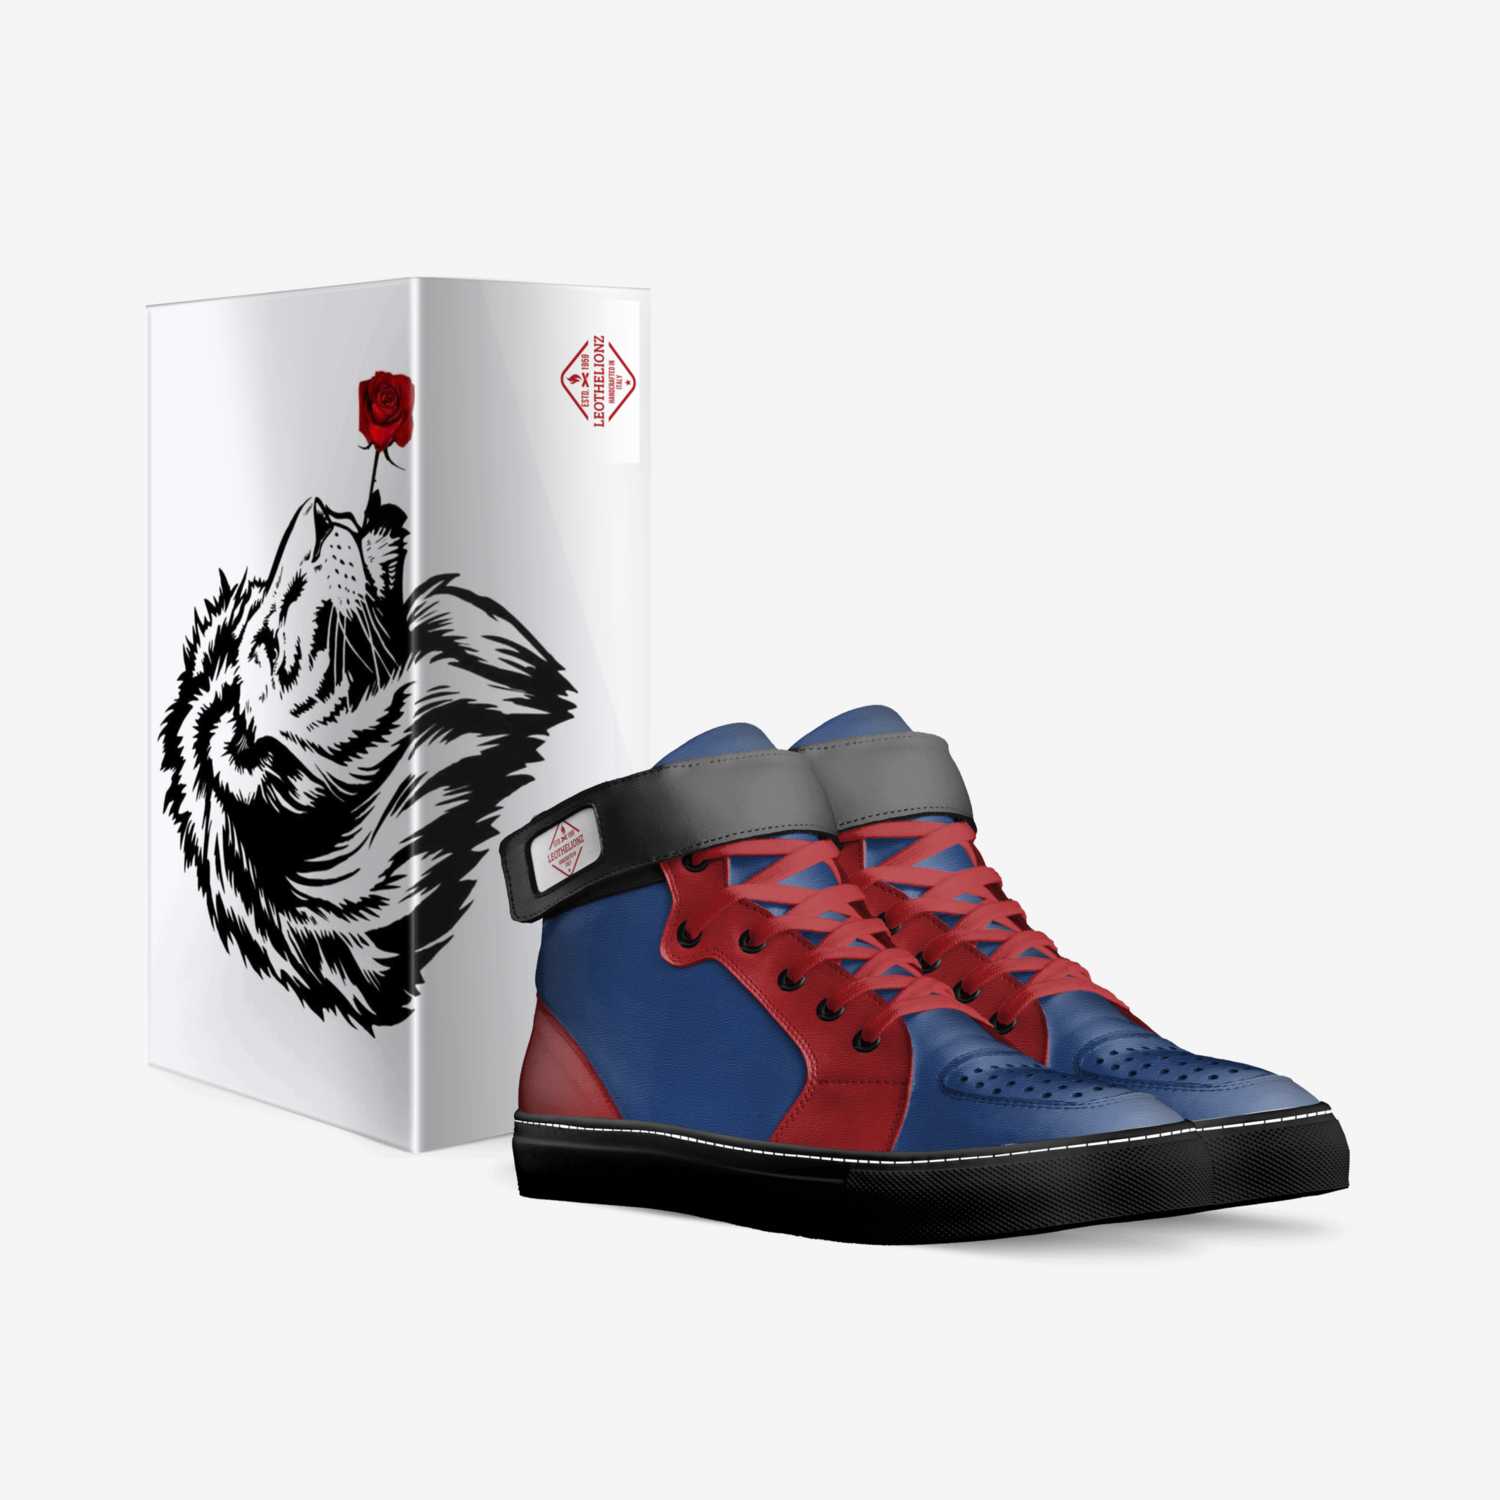 LEOtheLionz custom made in Italy shoes by Cody Digiuseppe | Box view